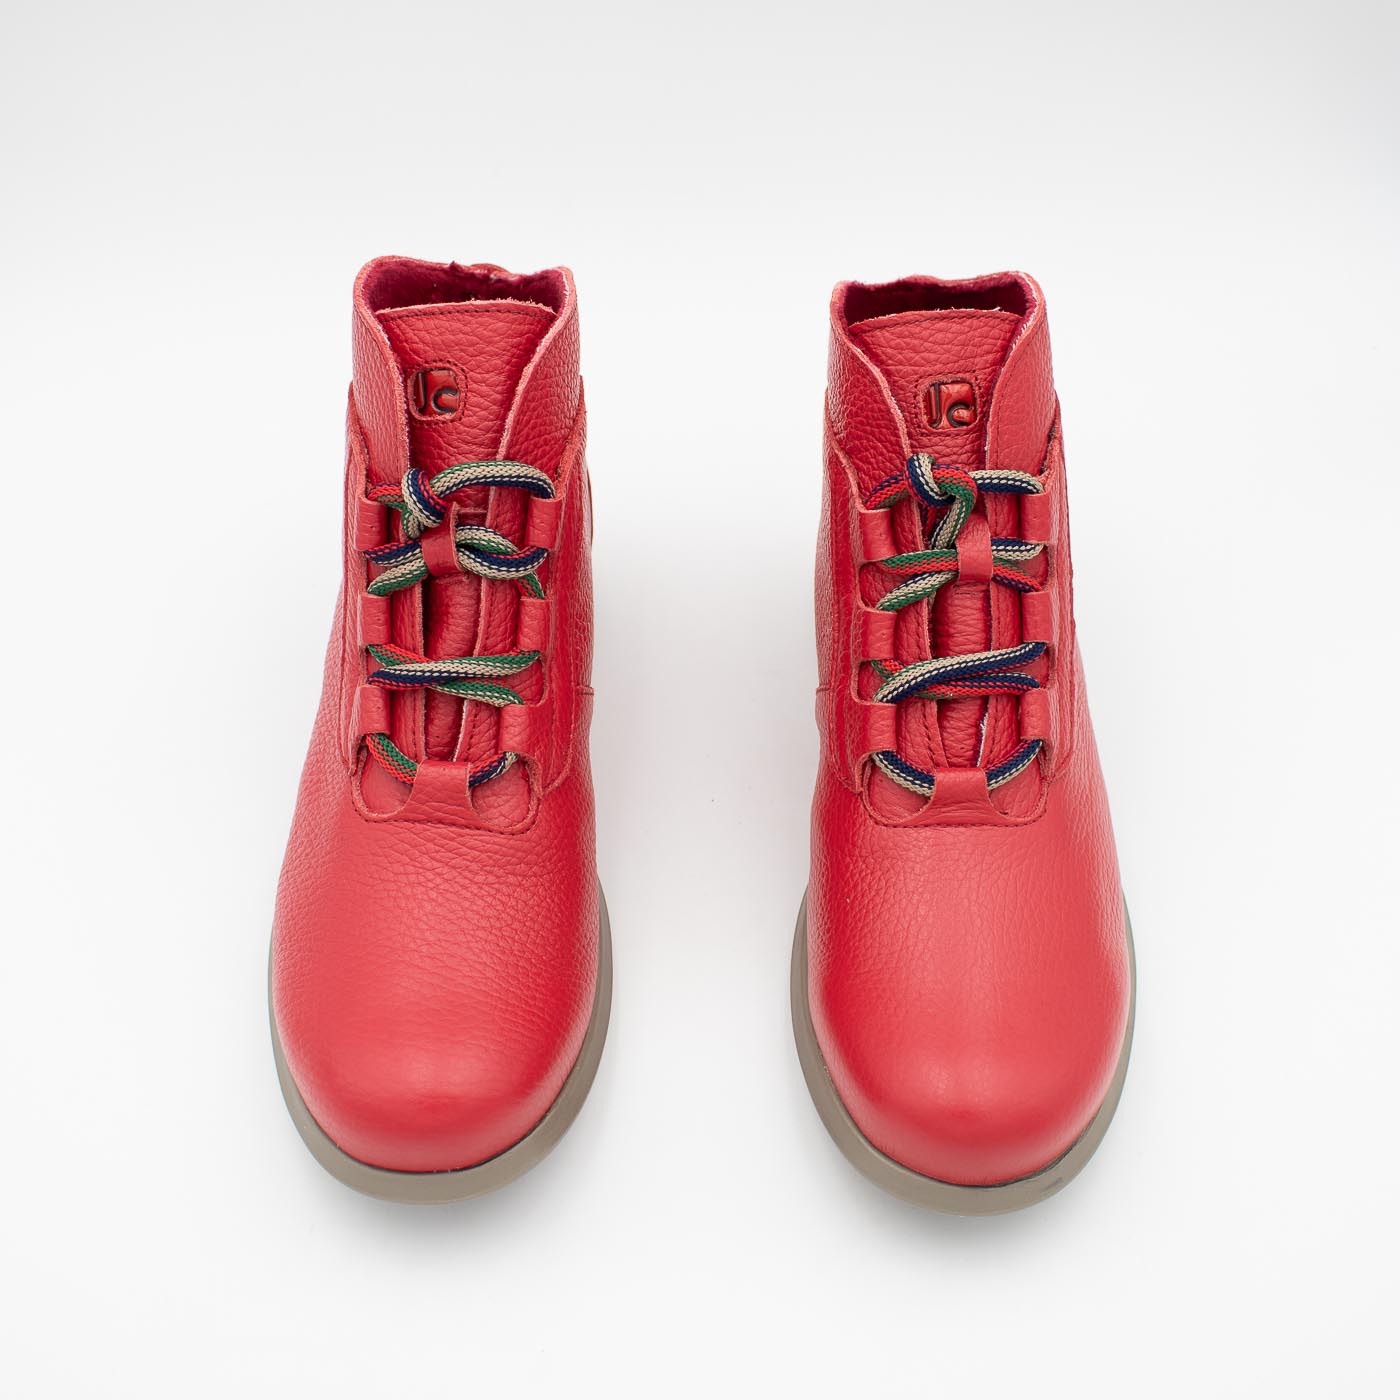 Frontal perspective of red ankle boot.